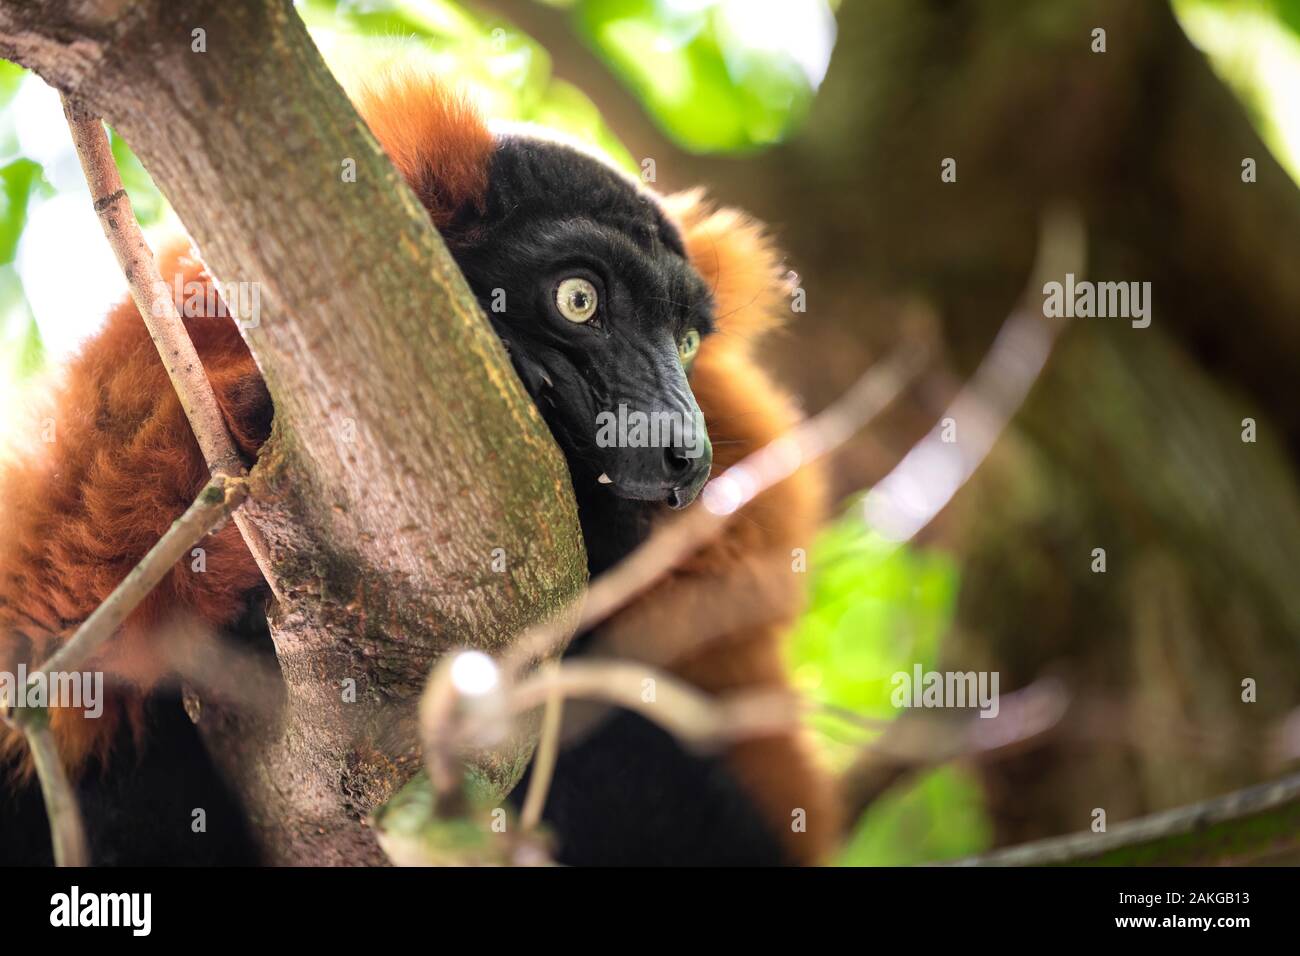 Close up of a black and red ruffed lemur perched on a branch and looking sideways, against a green bokeh background Stock Photo